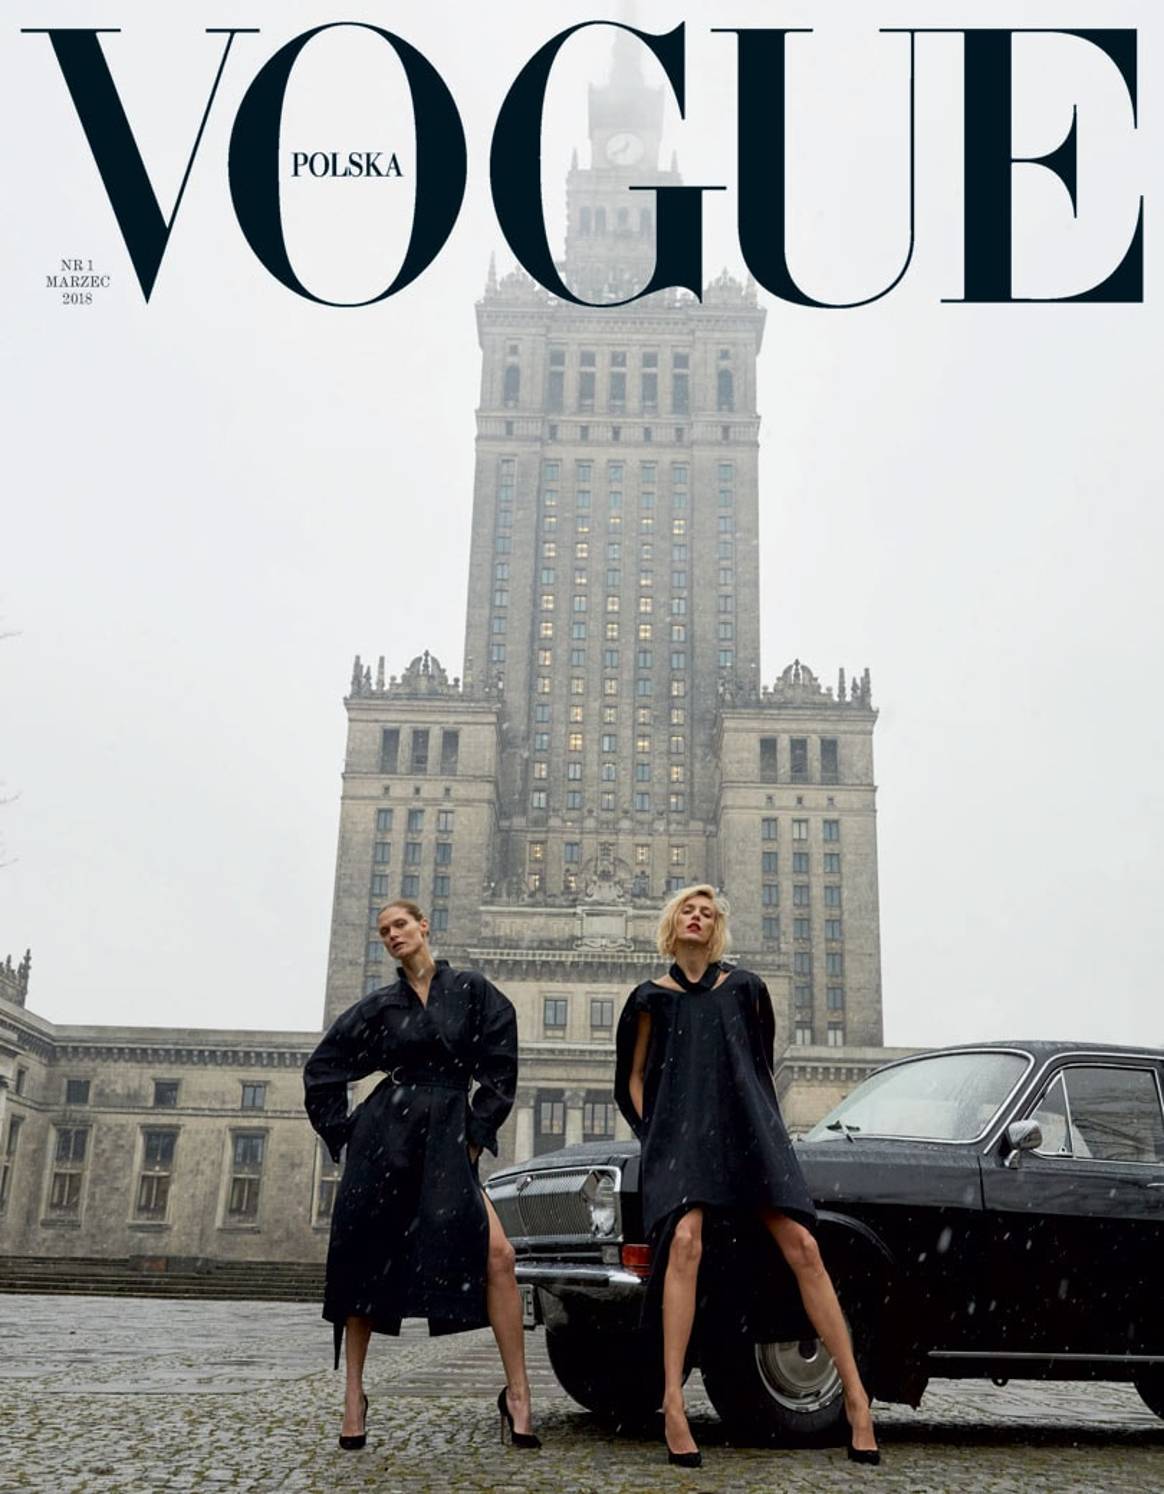 Vogue Poland to launch as a multi-media brand